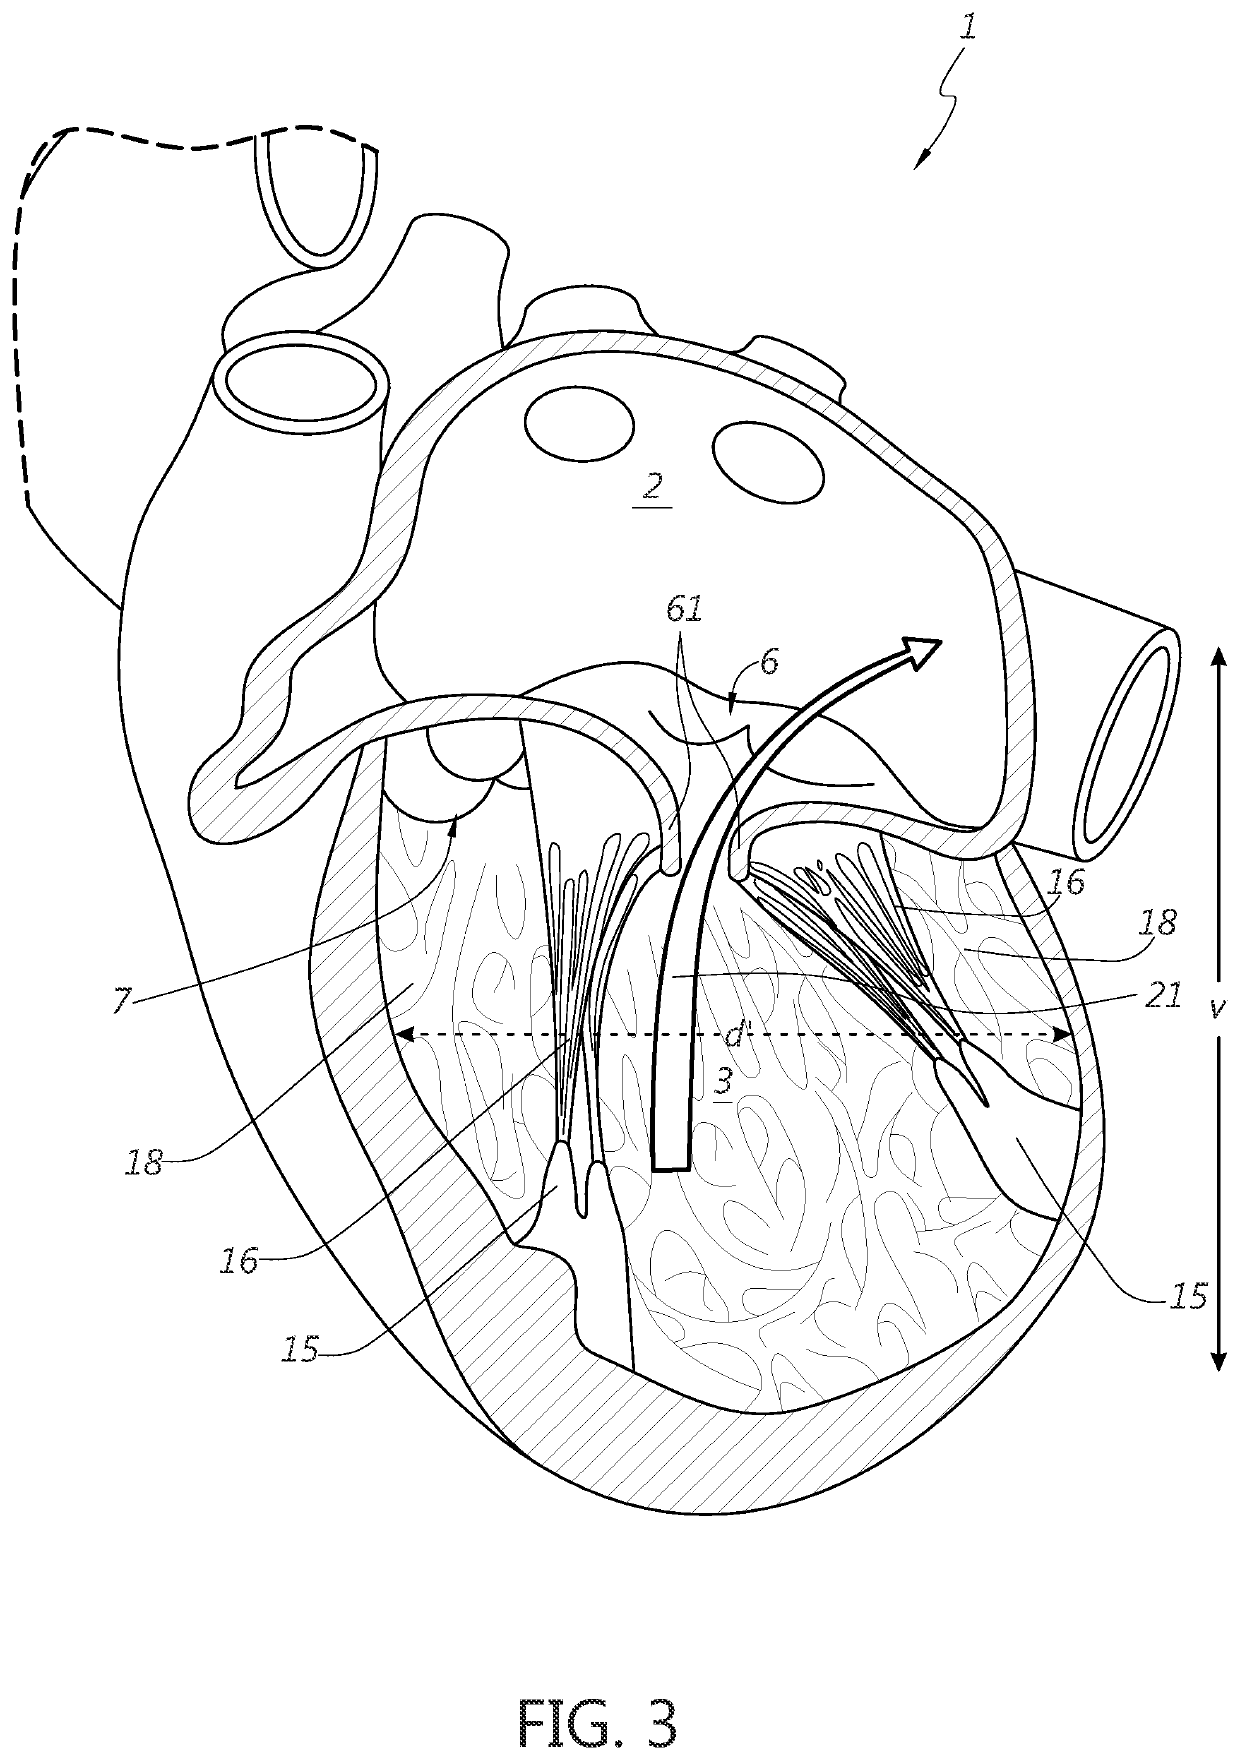 Ventricular remodeling using coil devices